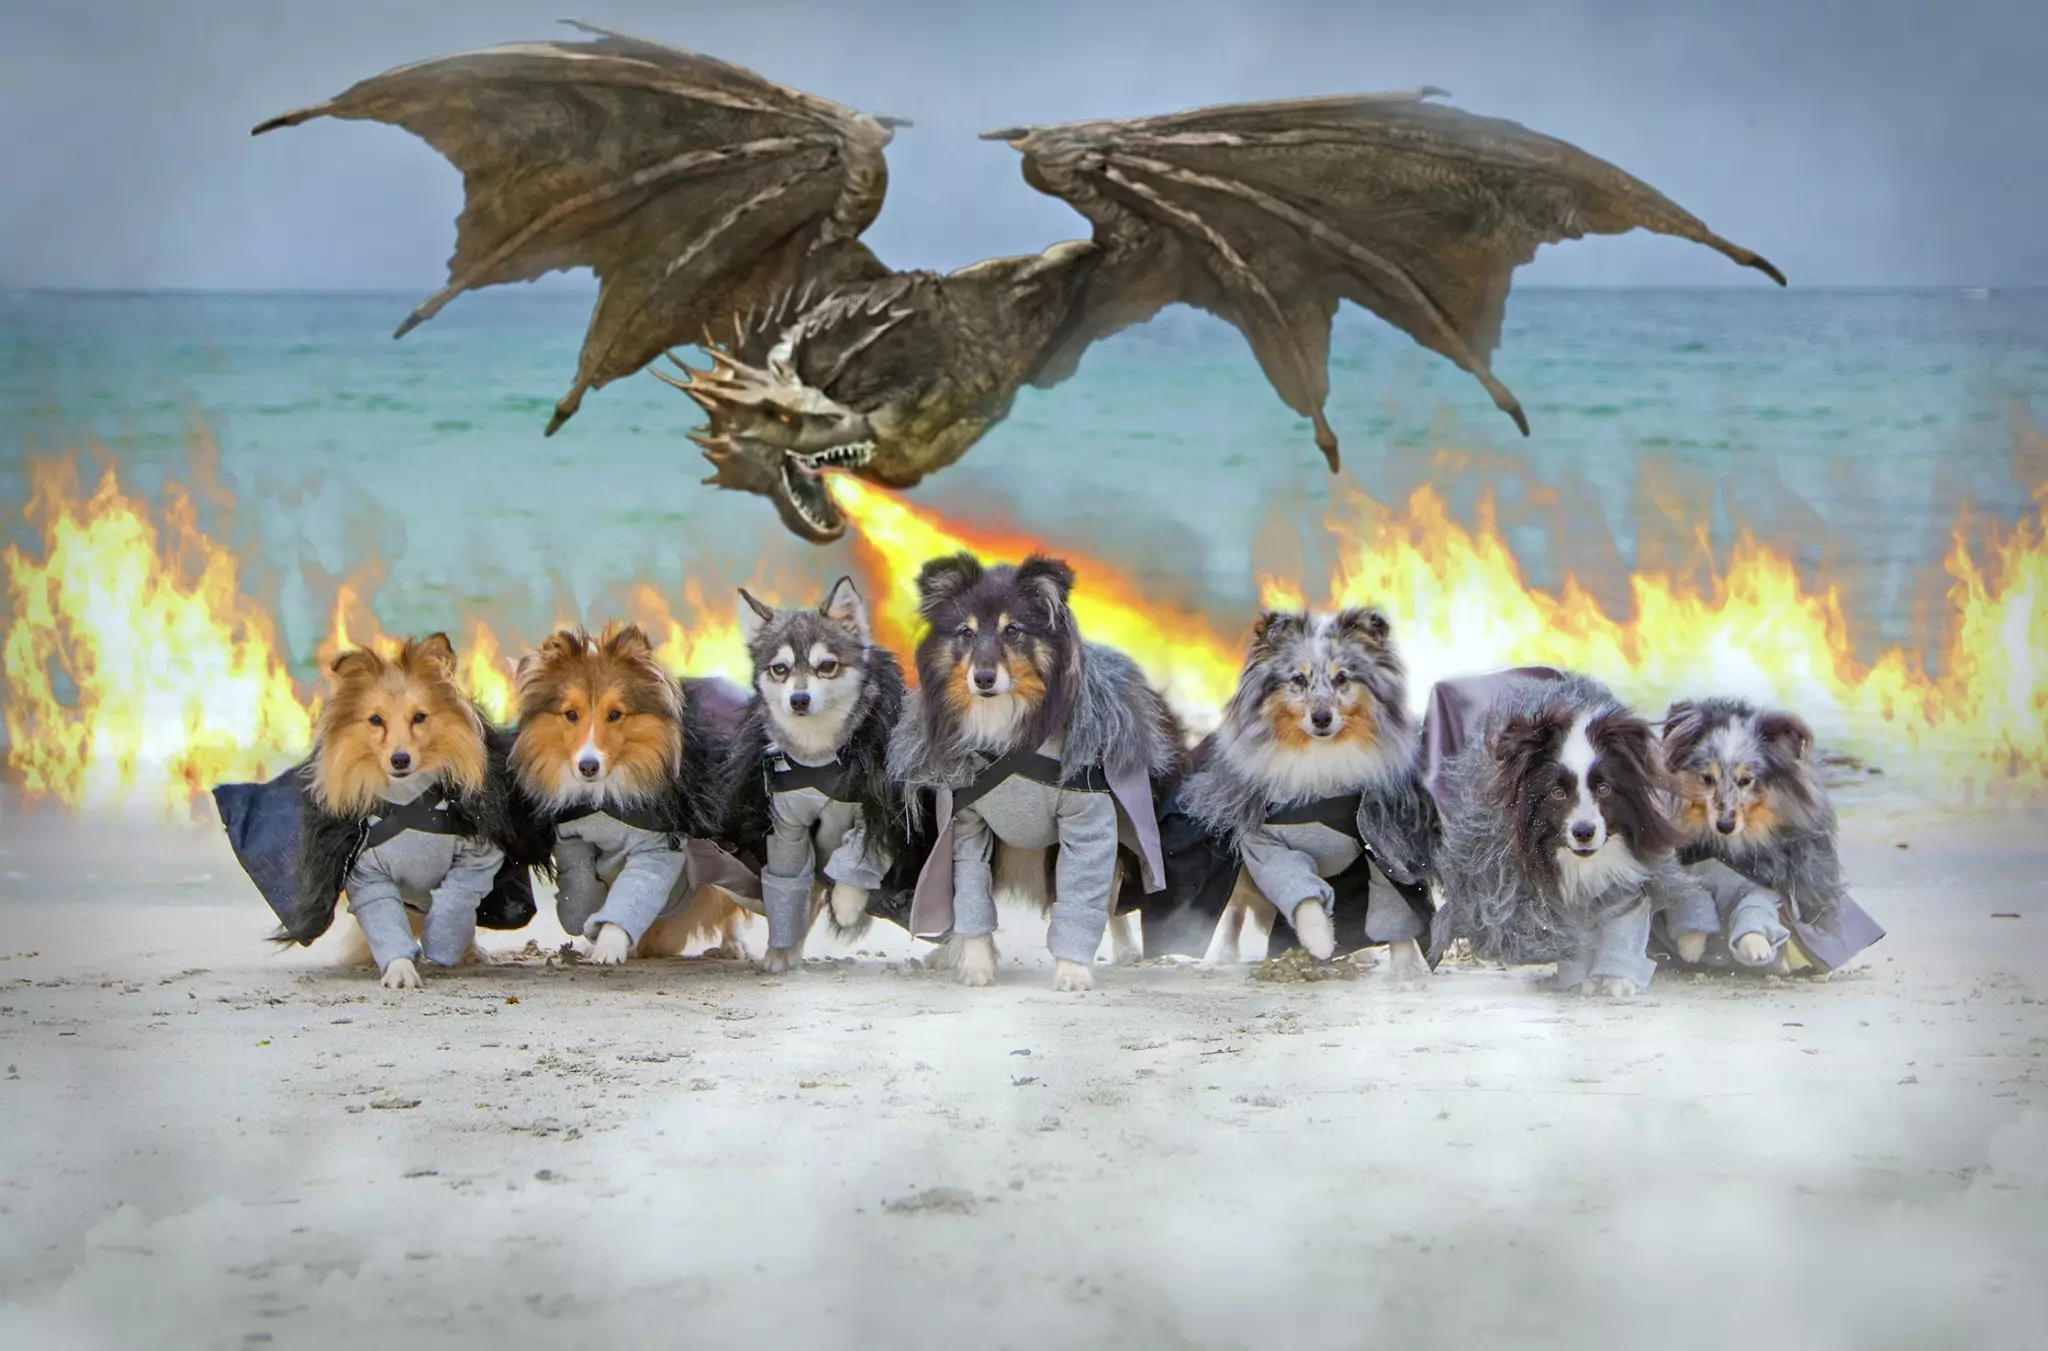 Kaylee photoshopped a dragon into this Game of Thrones image (